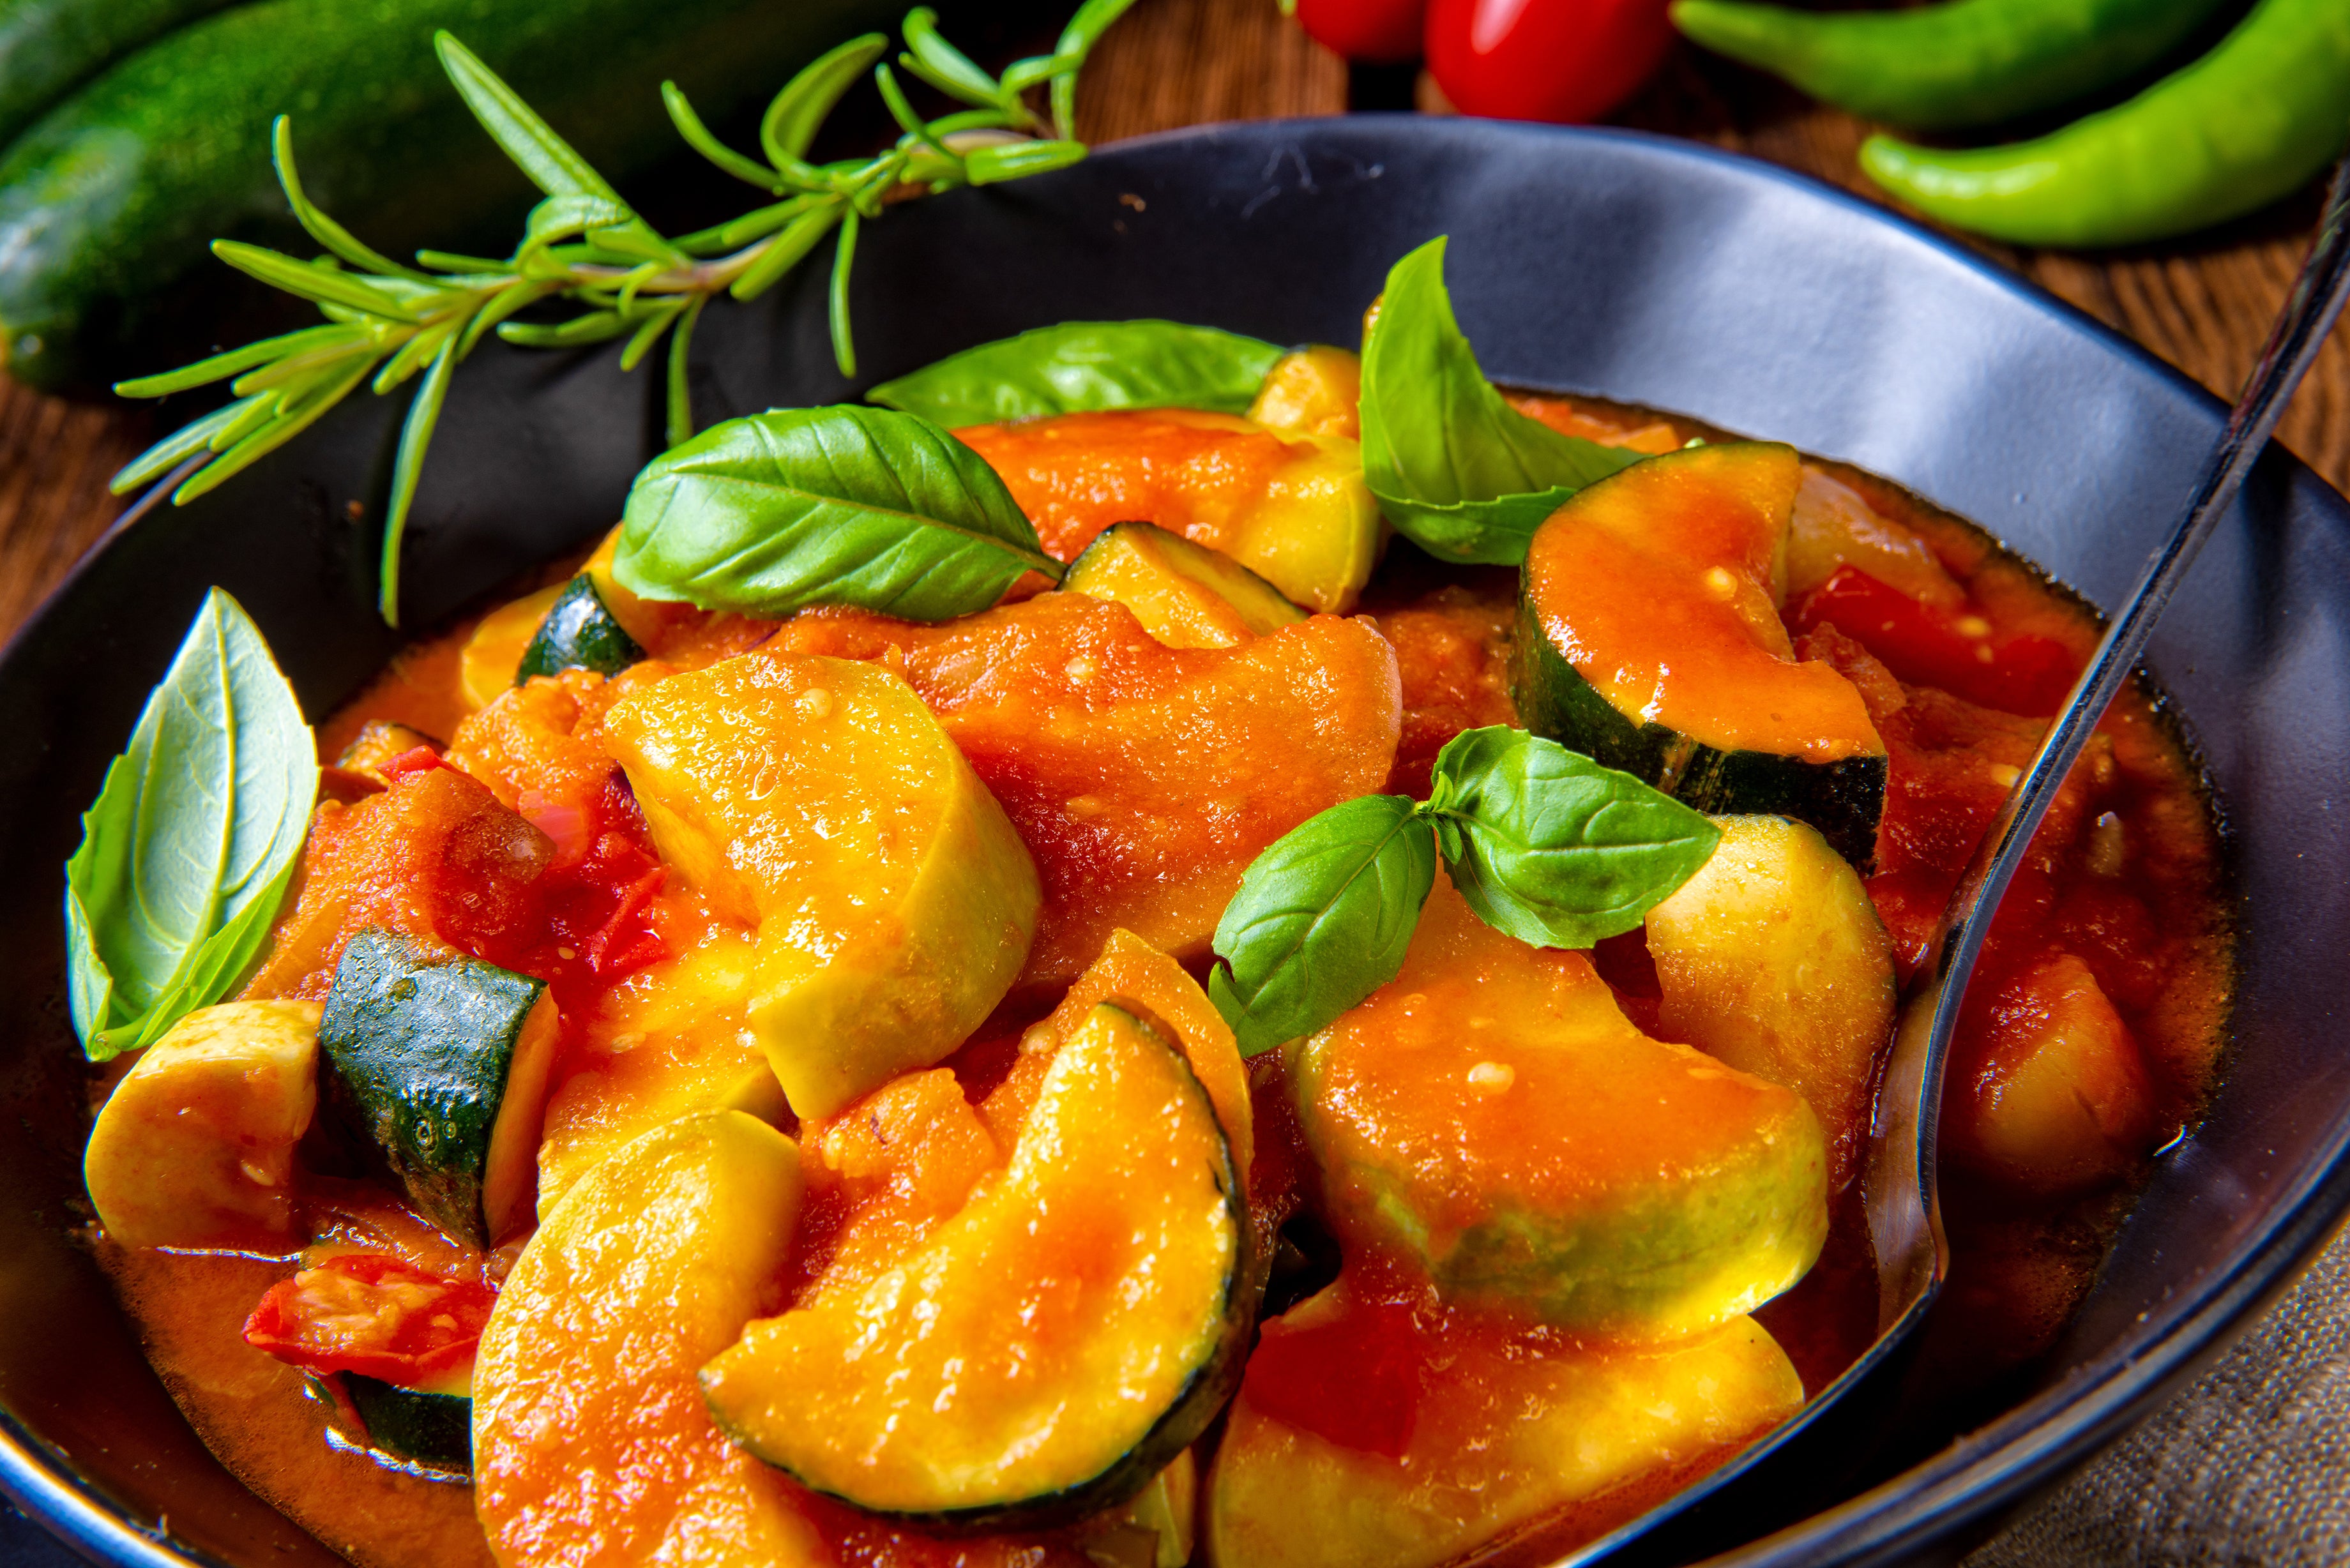 Ratatouill is a classic French dish made with sautéed eggplant, tomatoes, peppers, onions, and squash.